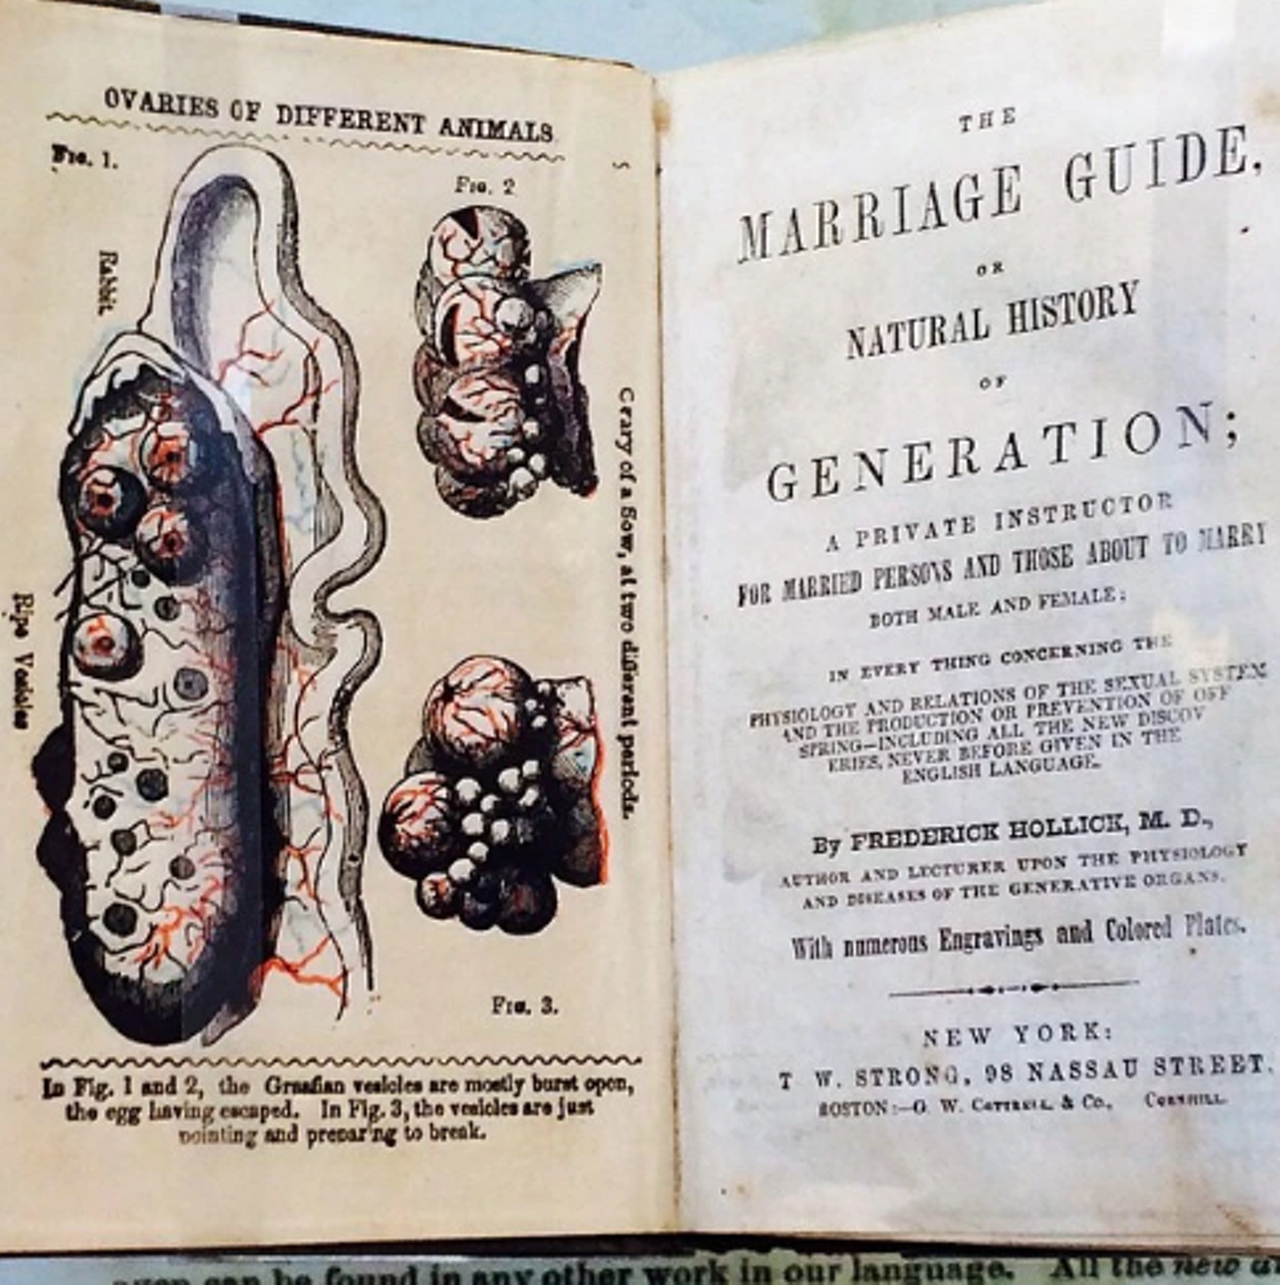 Guide to reproduction and fertility. Hollick, 1860.